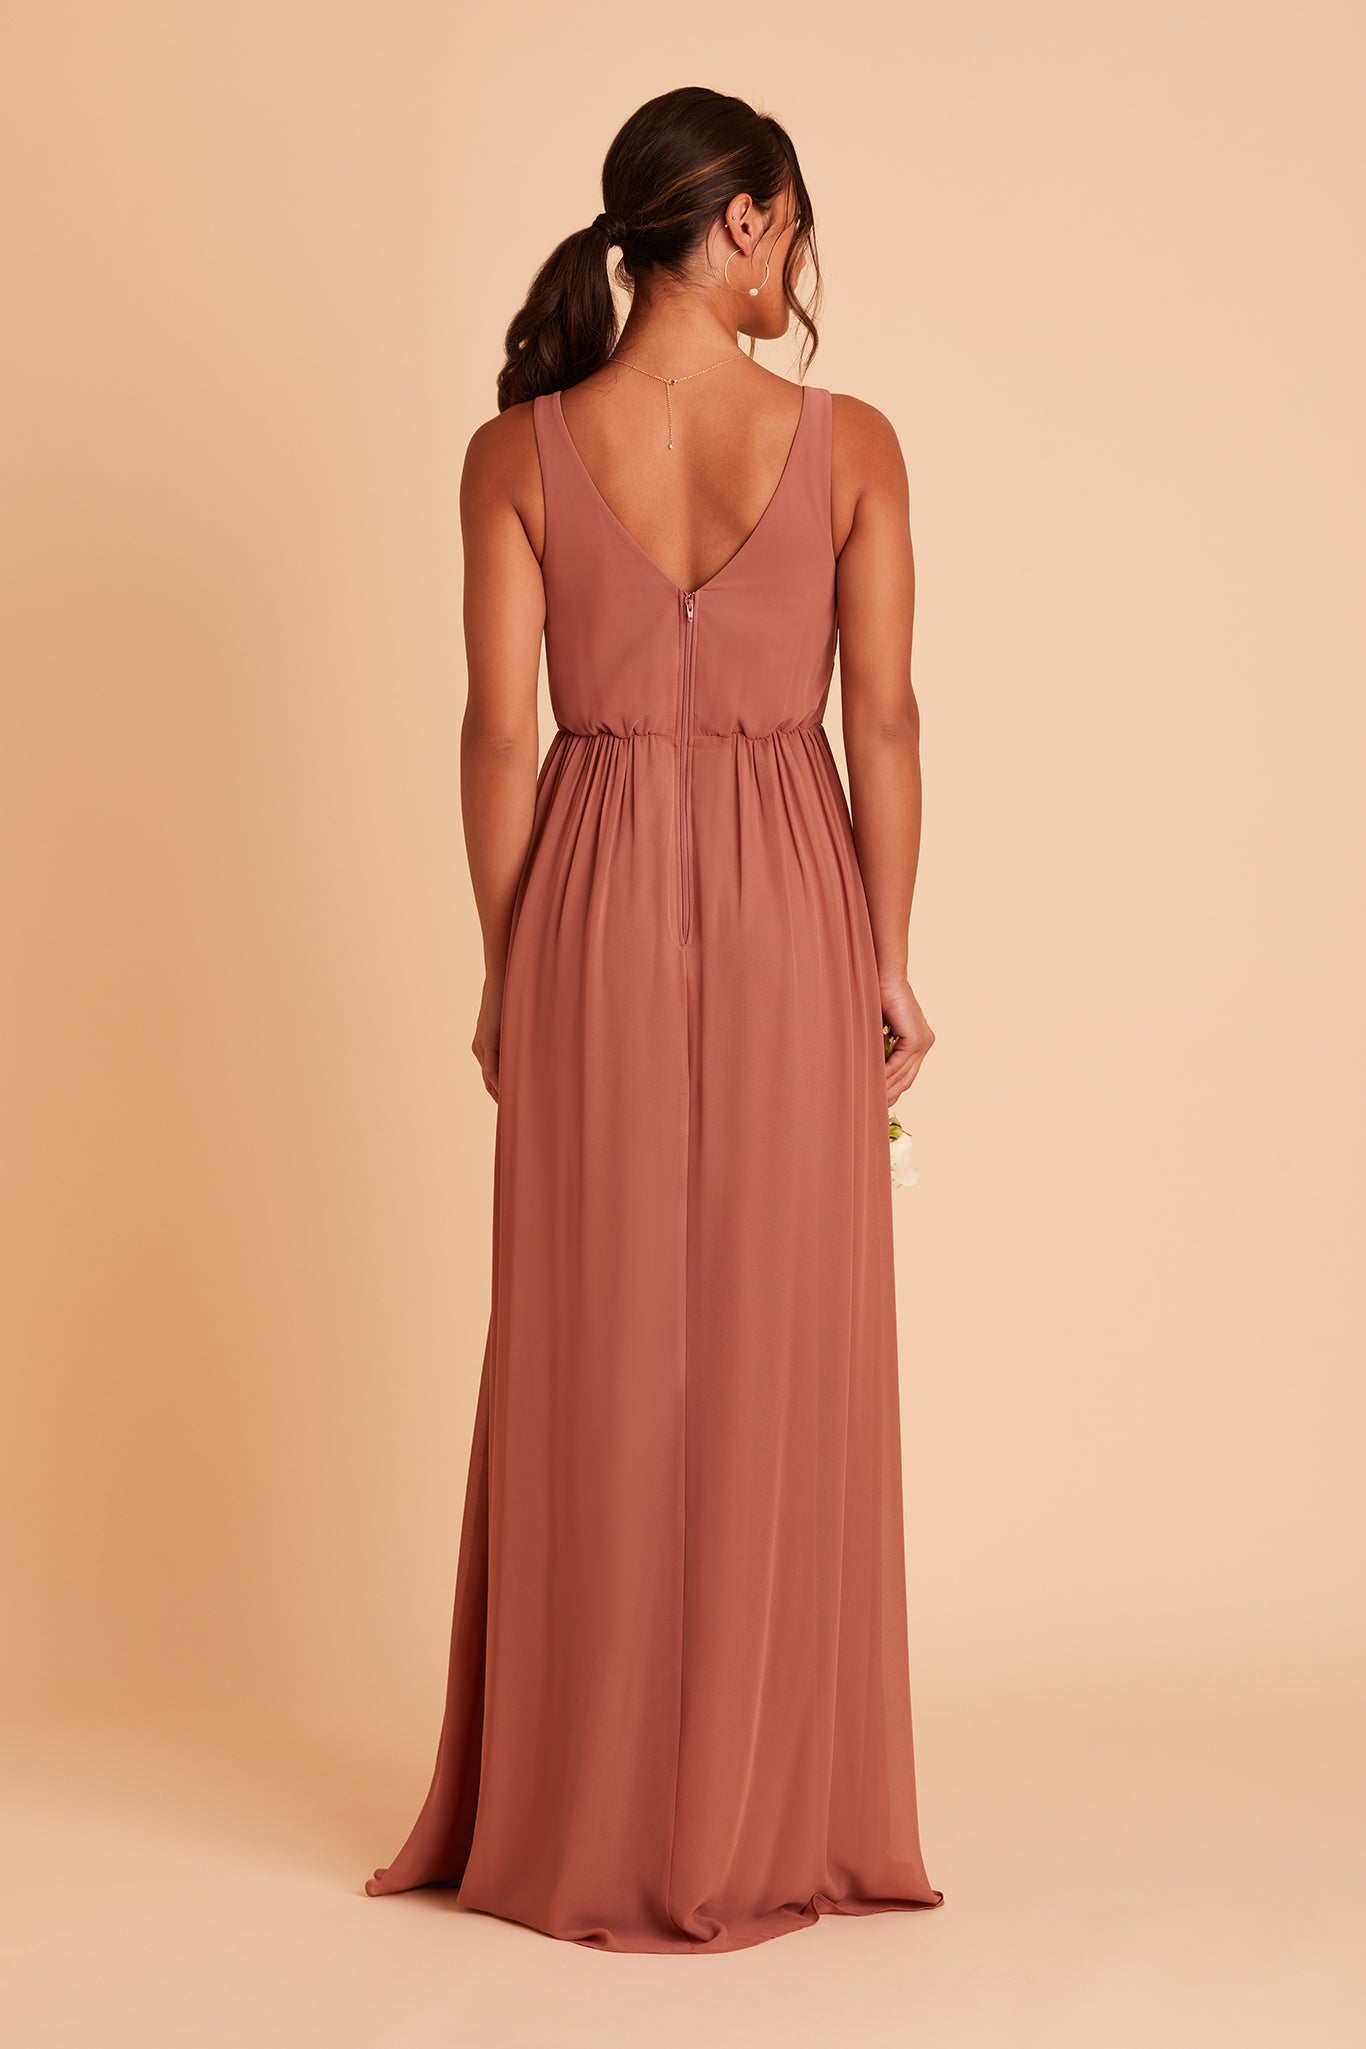 Laurie Empire bridesmaid dress with slit in desert rose chiffon by Birdy Grey, back view